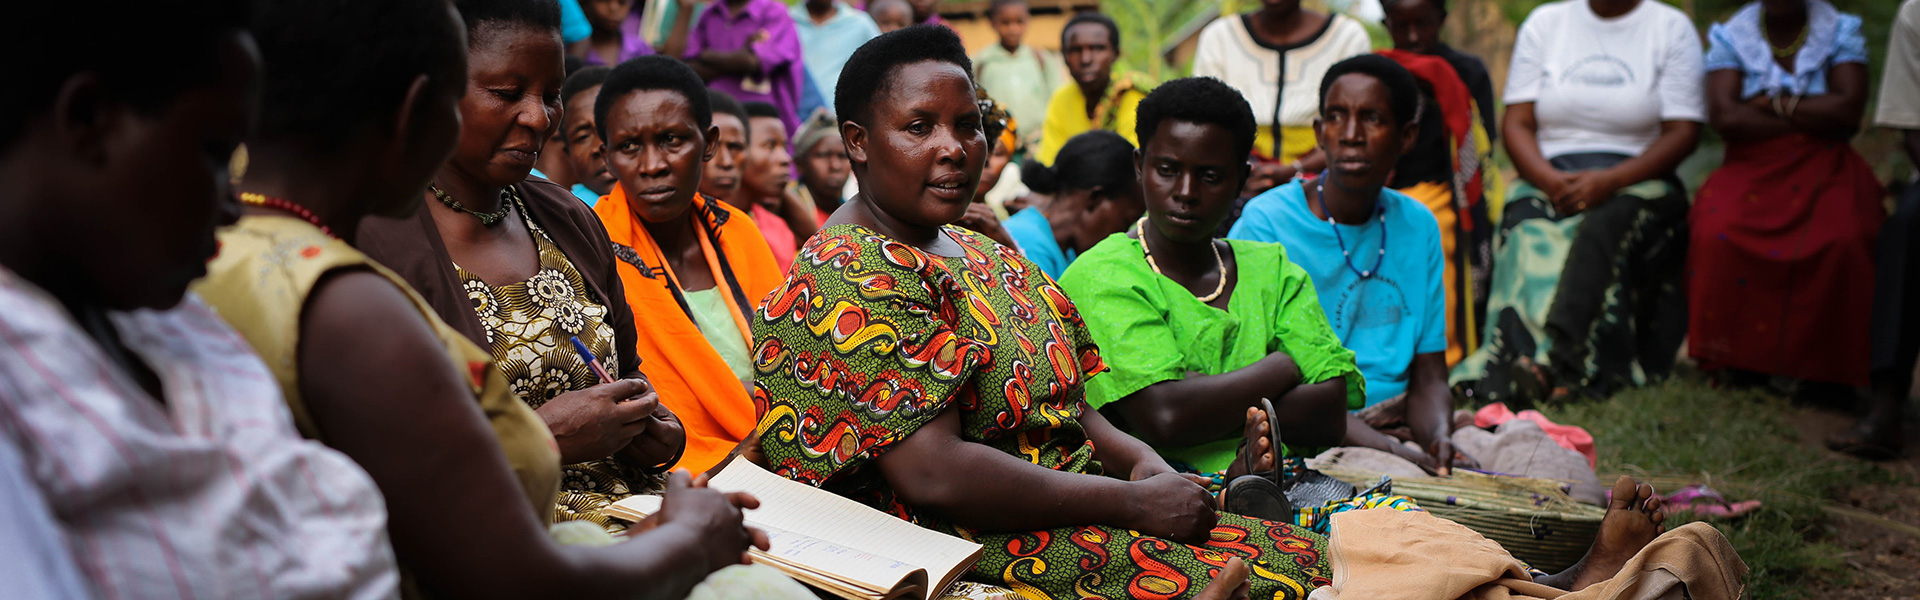 Women sitting together in a savings group.